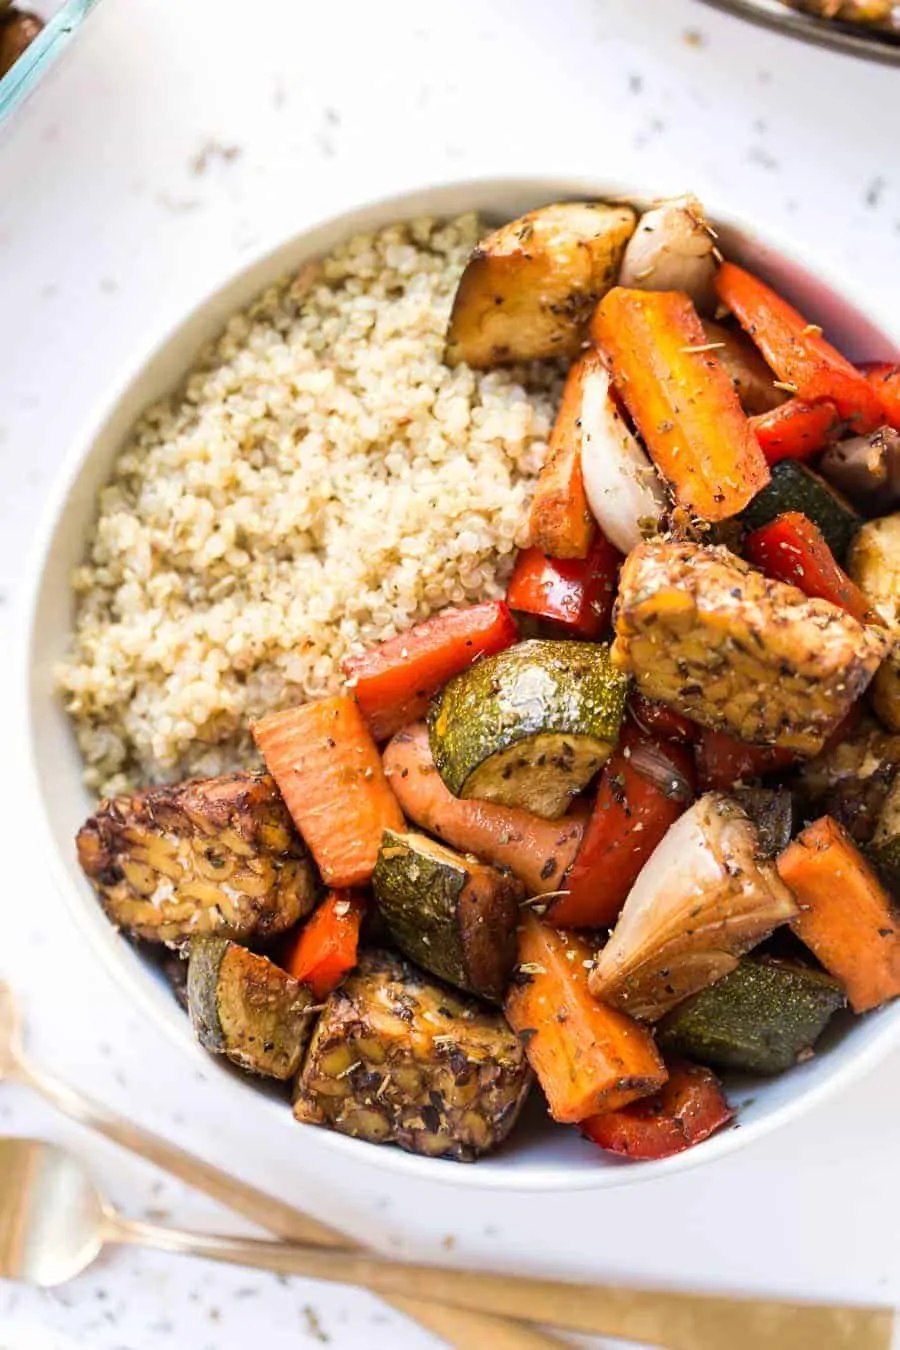 These SHEET PAN Balsamic Tempeh & Roasted Vegetable Quinoa Bowls are so easy to make and perfect for meal prep!